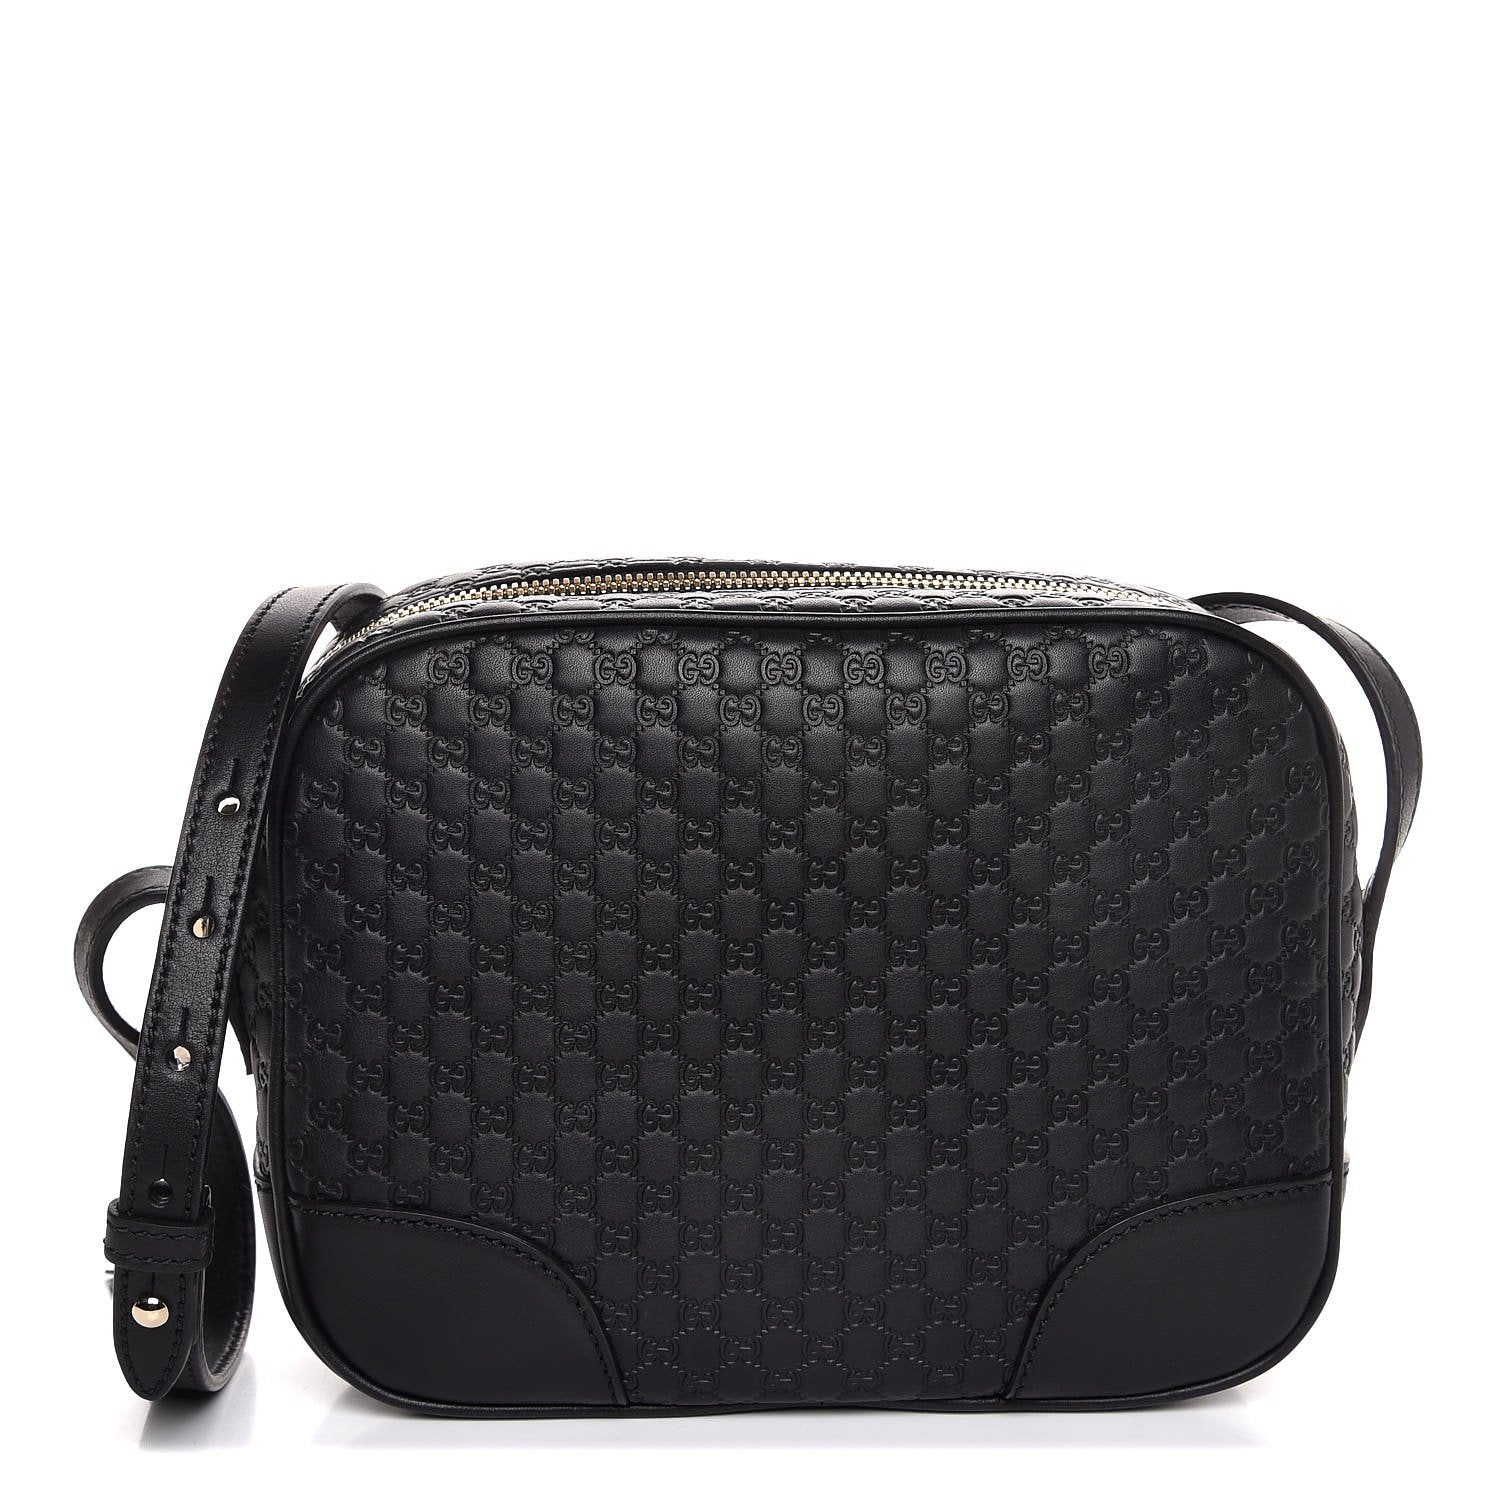 Gucci Bree Microguccissima GG Black Crossbody 449413 at_Queen_Bee_of_Beverly_Hills